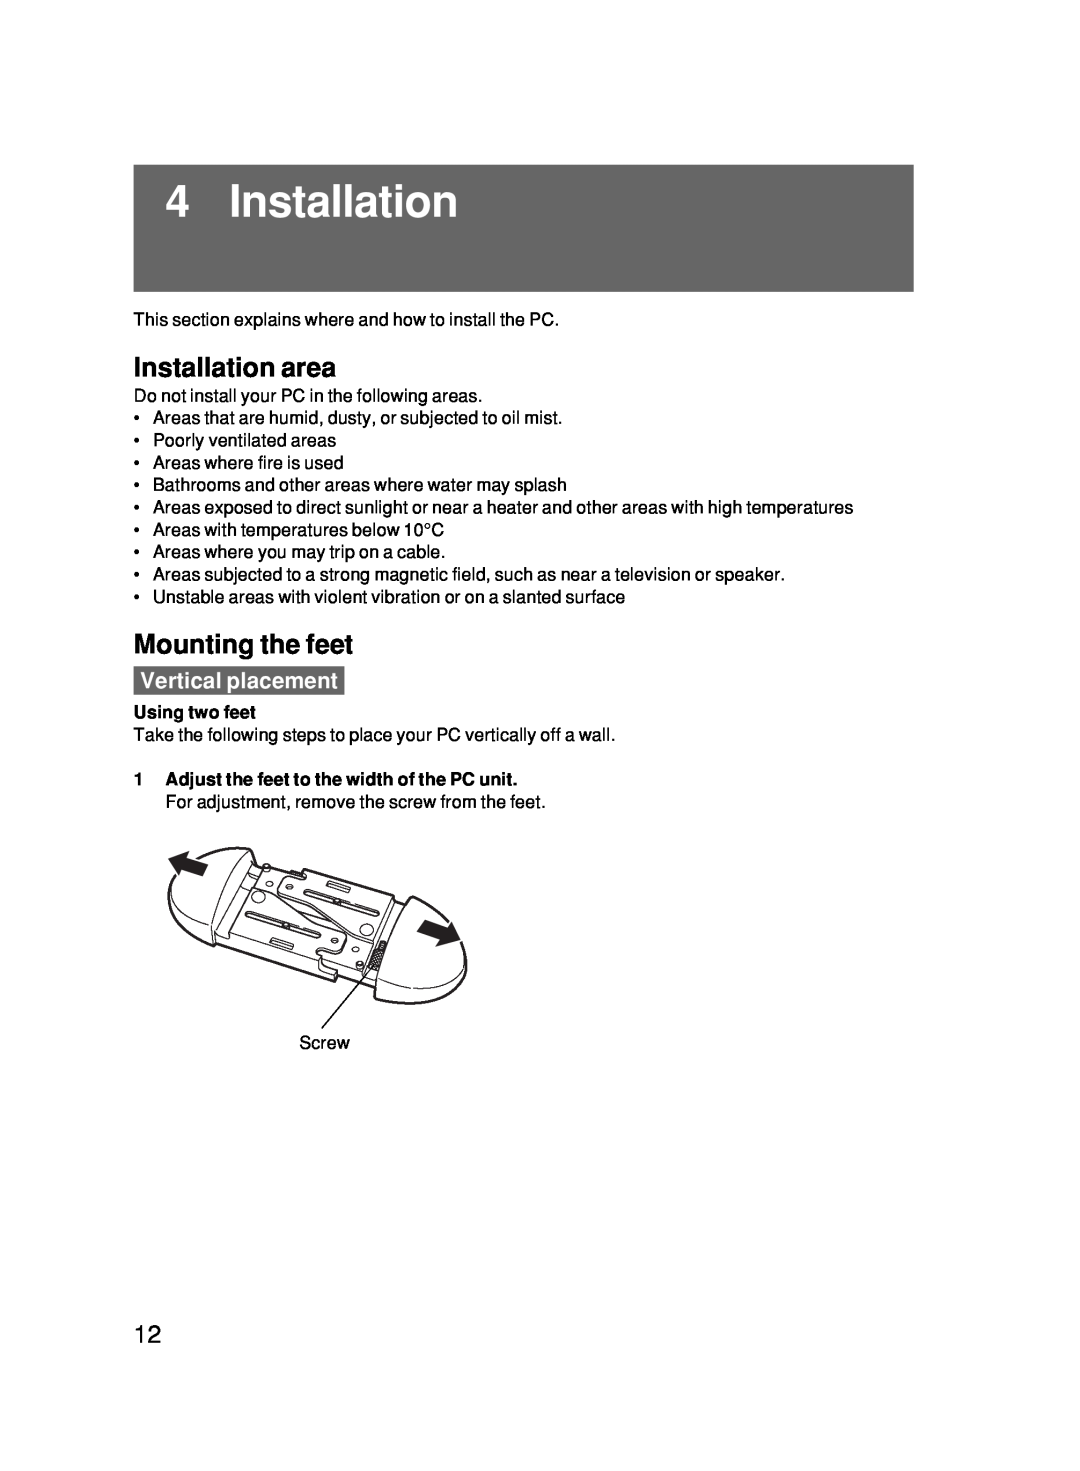 Fujitsu 500 user manual Installation area, Mounting the feet, Vertical placement, Using two feet 